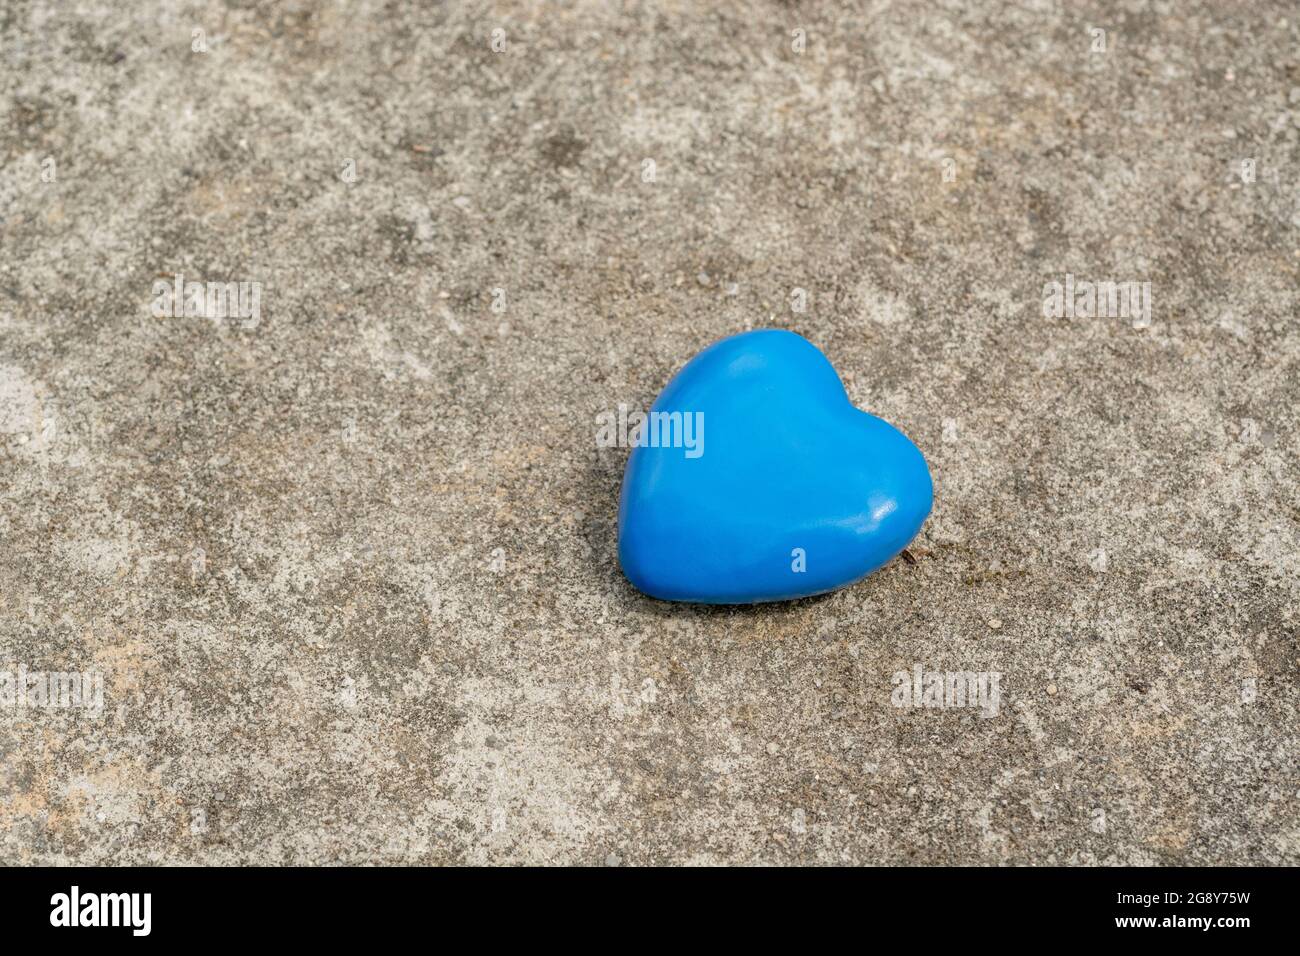 Blue heart on weathered cement surface for Blue Monday, feeling gloomy / dispirited, UK Covid lockdown mental health, career blues, being dumped. Stock Photo